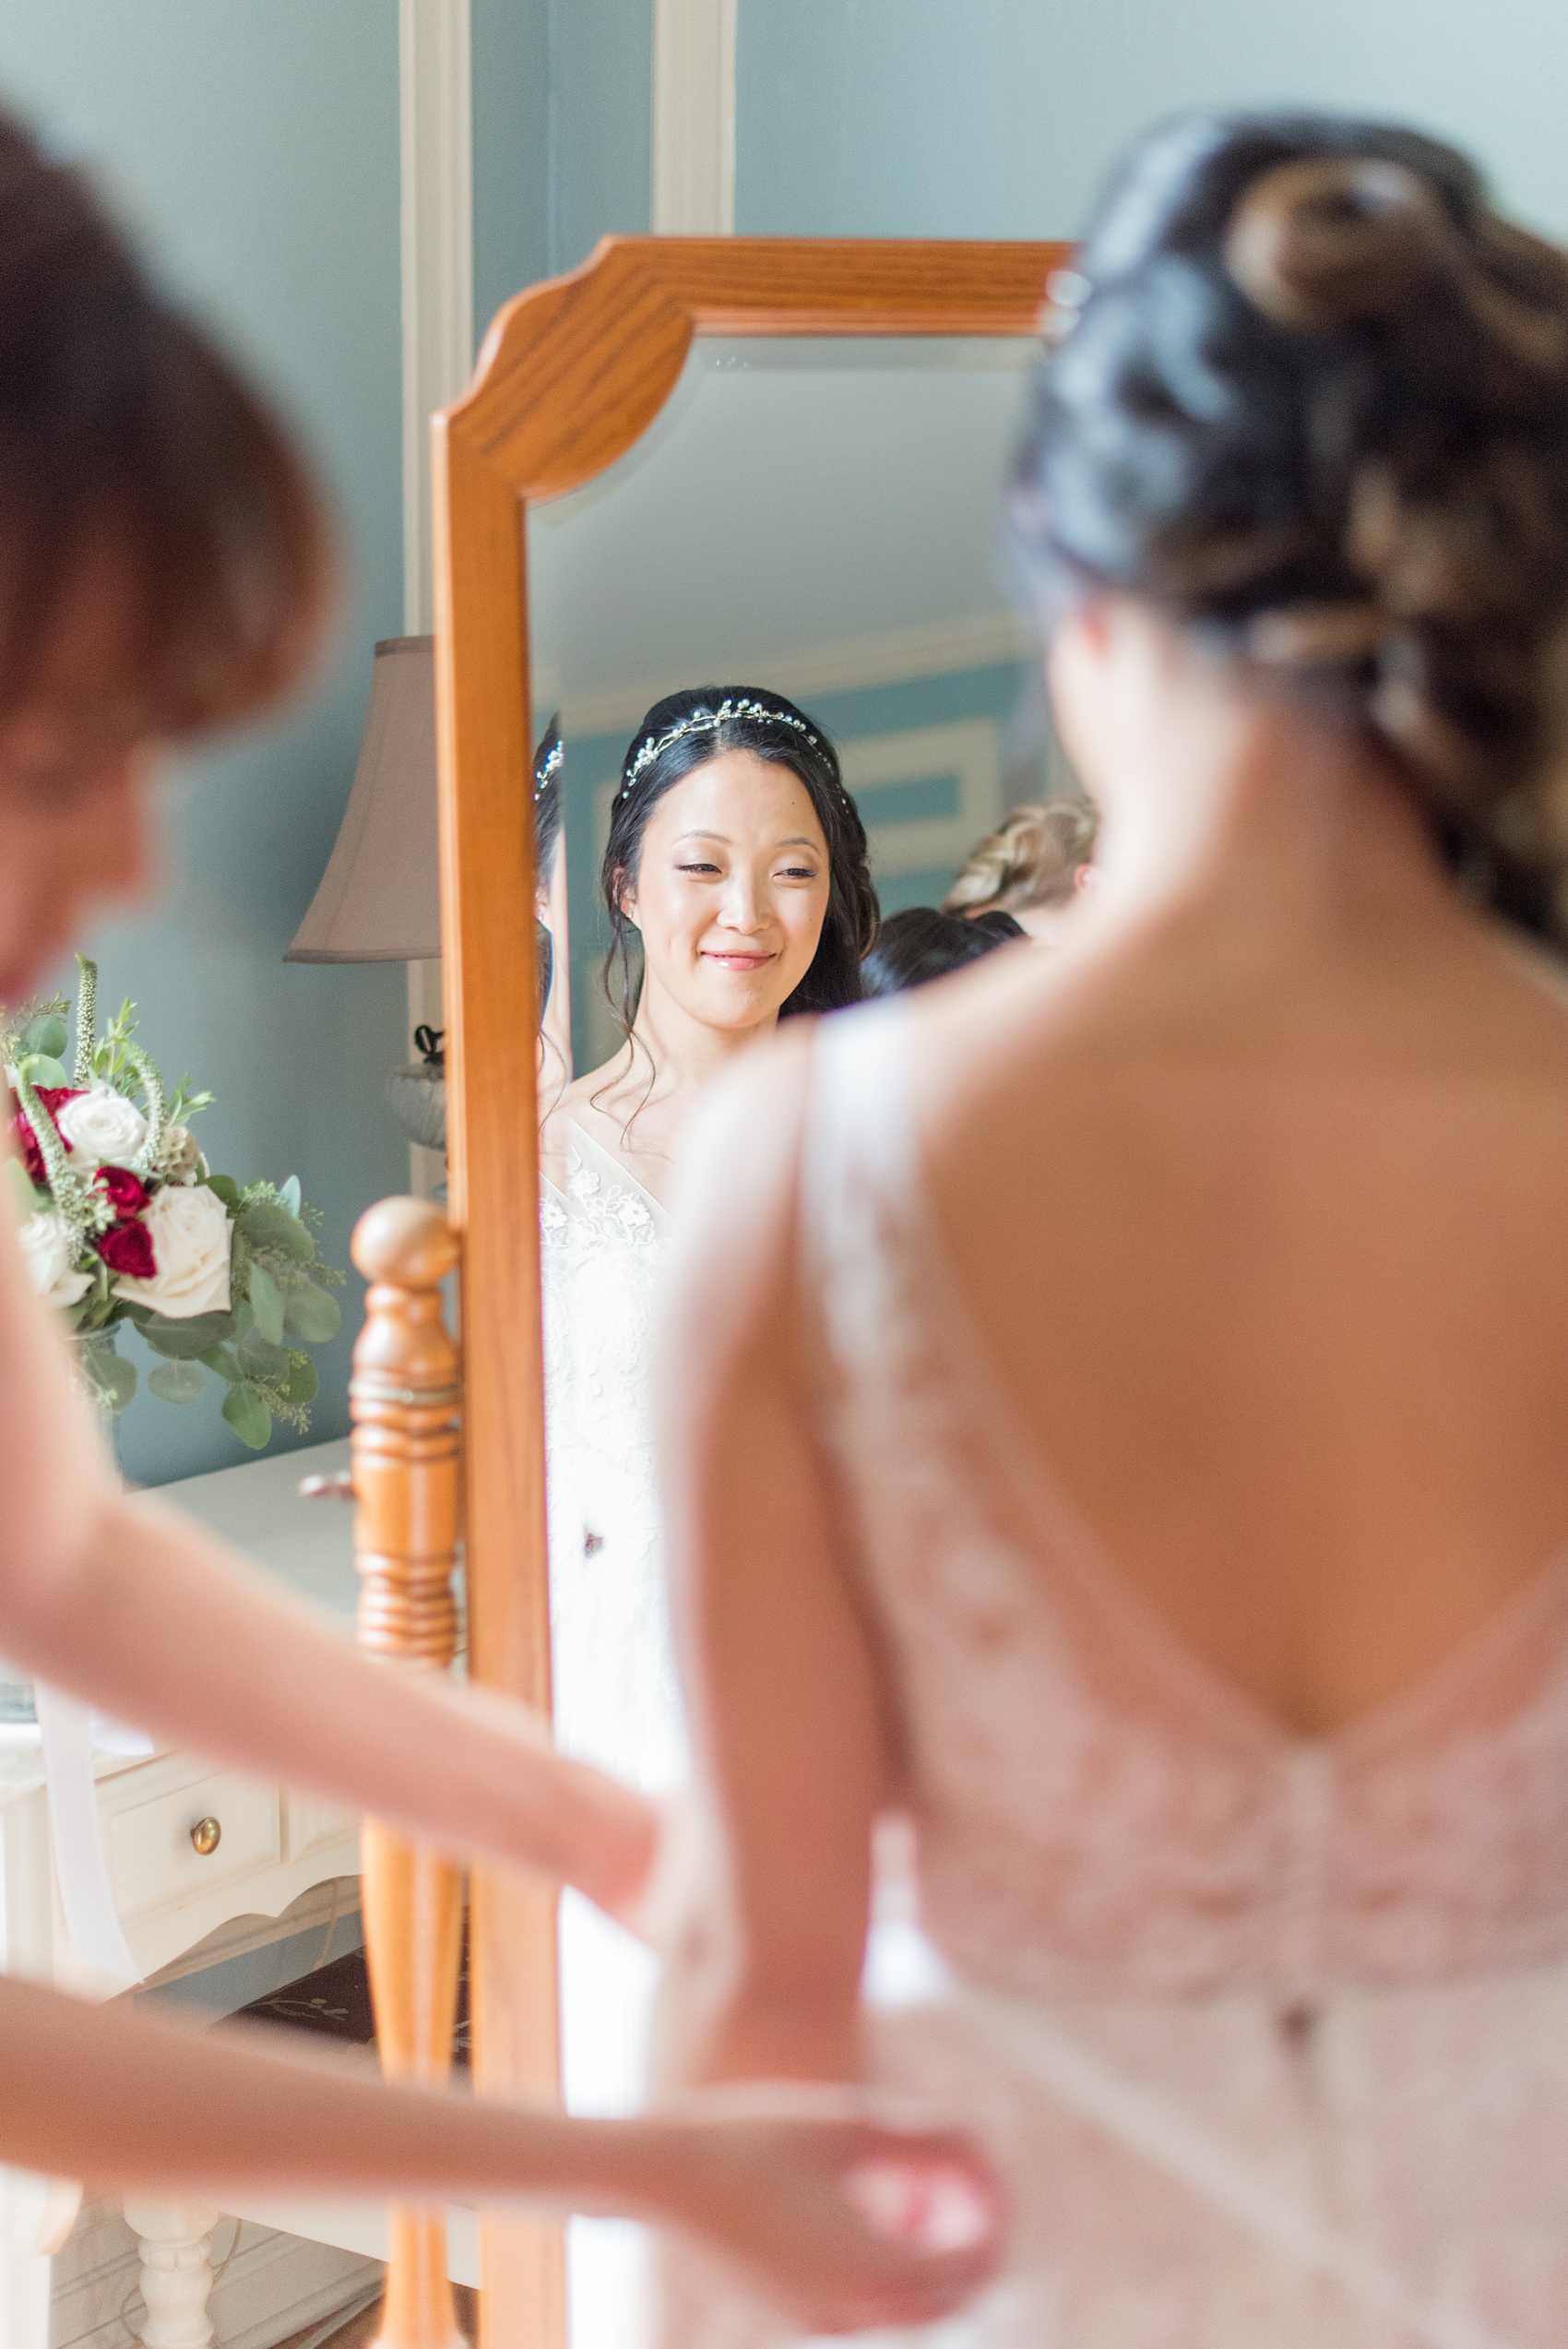 Wedding photos at Crabtree's Kittle House in Chappaqua, New York by Mikkel Paige Photography. The bride, her mother and bridesmaids got ready on location at this Westchester County historic home. Click through to see more photos from this gorgeous day! #mikkelpaige #CrabtreesKittleHouse #AsianWeddingTraditions #WestchesterWeddingVenues #WestchesterWedding #summerwedding #weddingdetails #bride #gettingready #weddinggettingready #historichome 